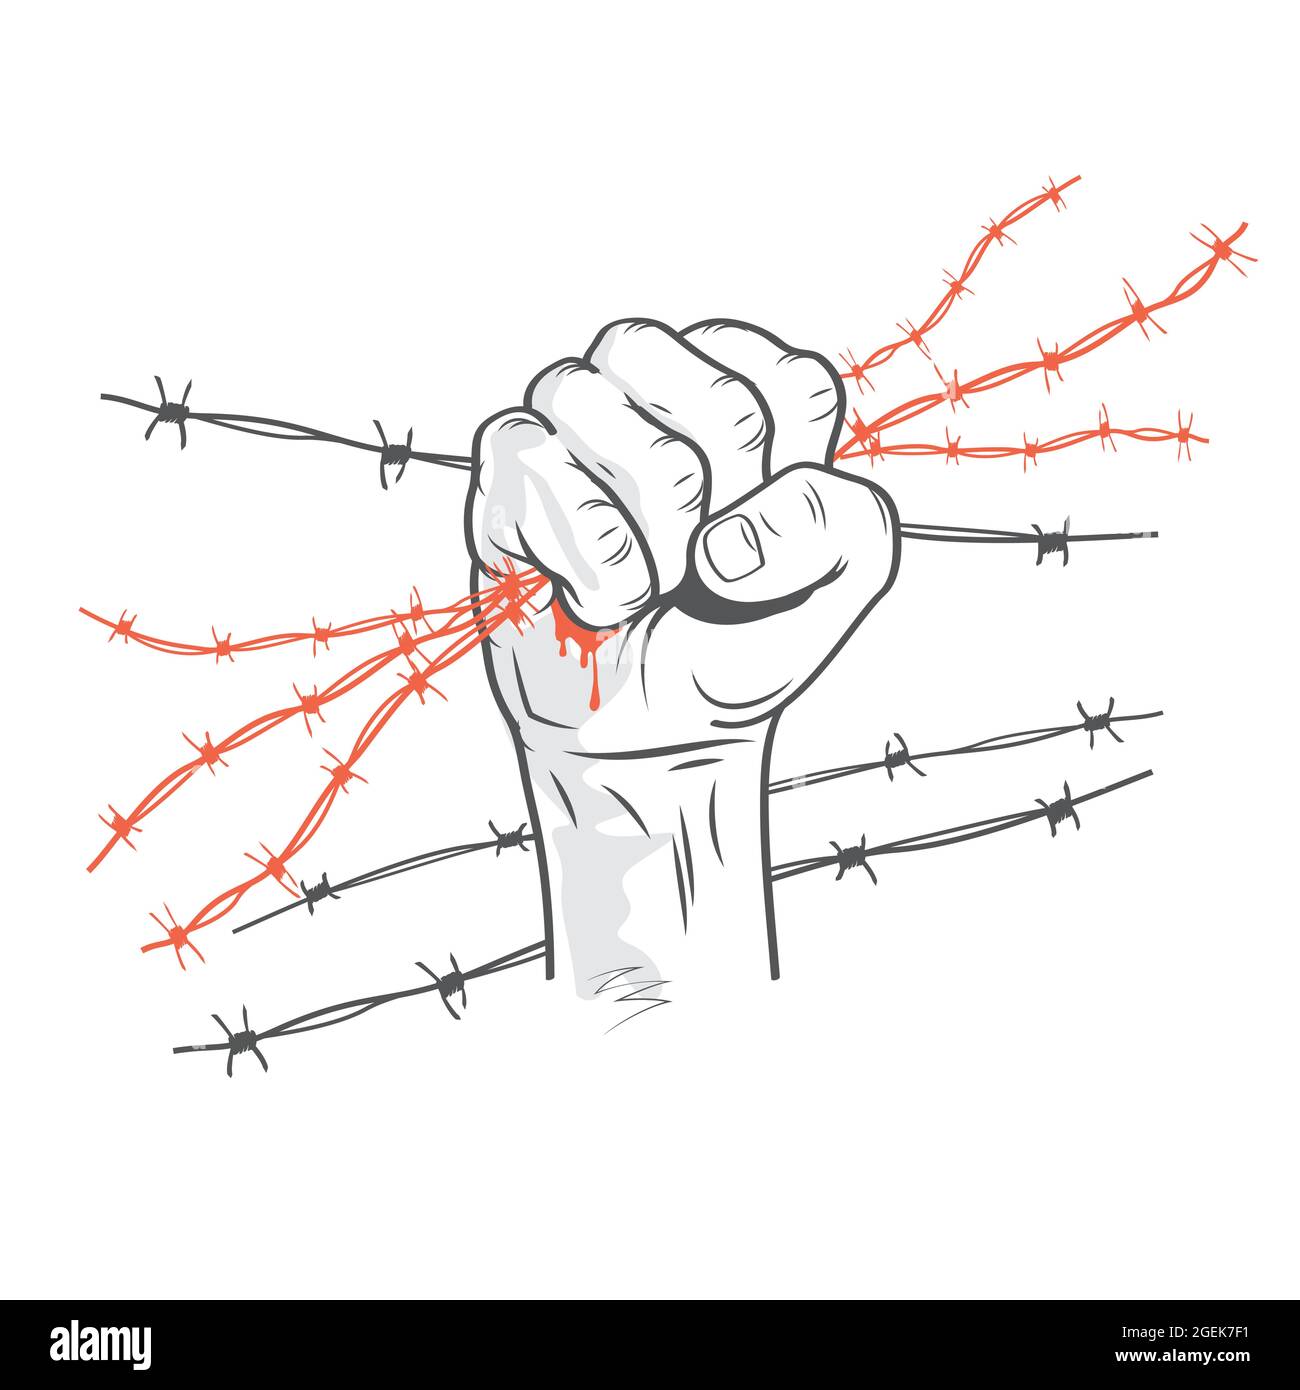 Barbed wire clenched in fist. Illustration on the theme of dictatorship and the Holocaust. Console camp. Resistance and revolution symbol concept Stock Vector